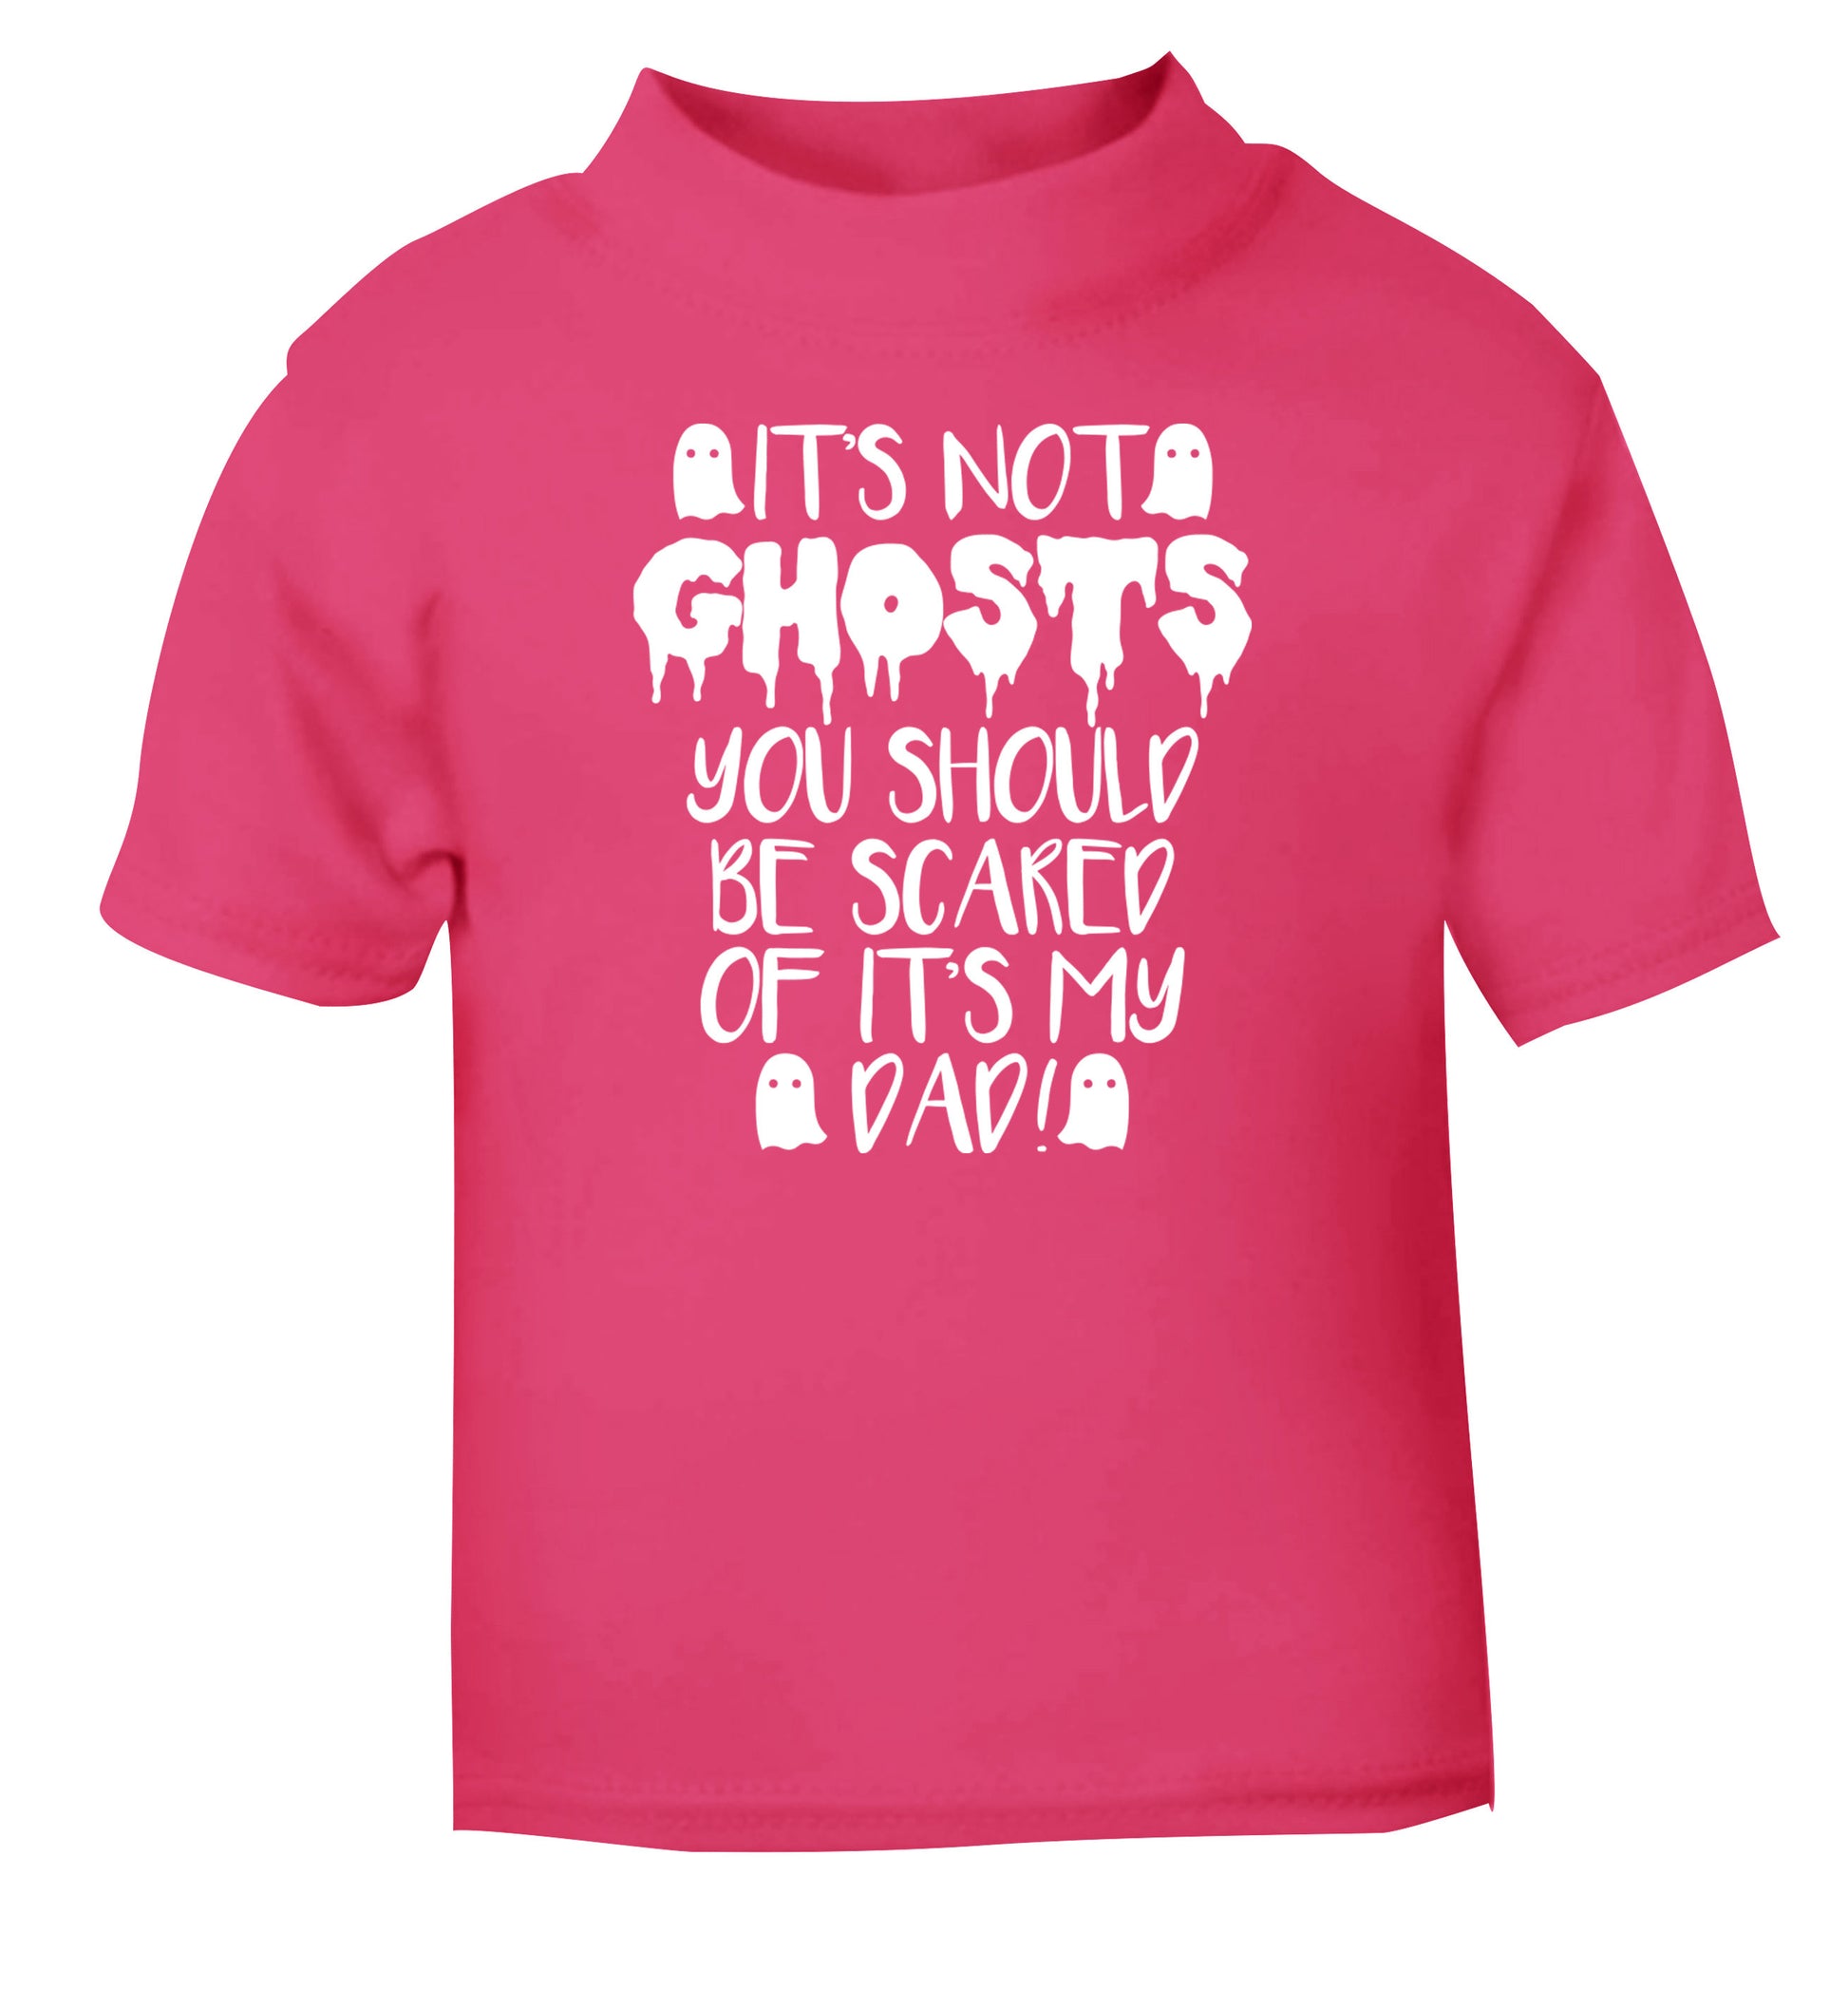 It's not ghosts you should be scared of it's my dad! pink Baby Toddler Tshirt 2 Years